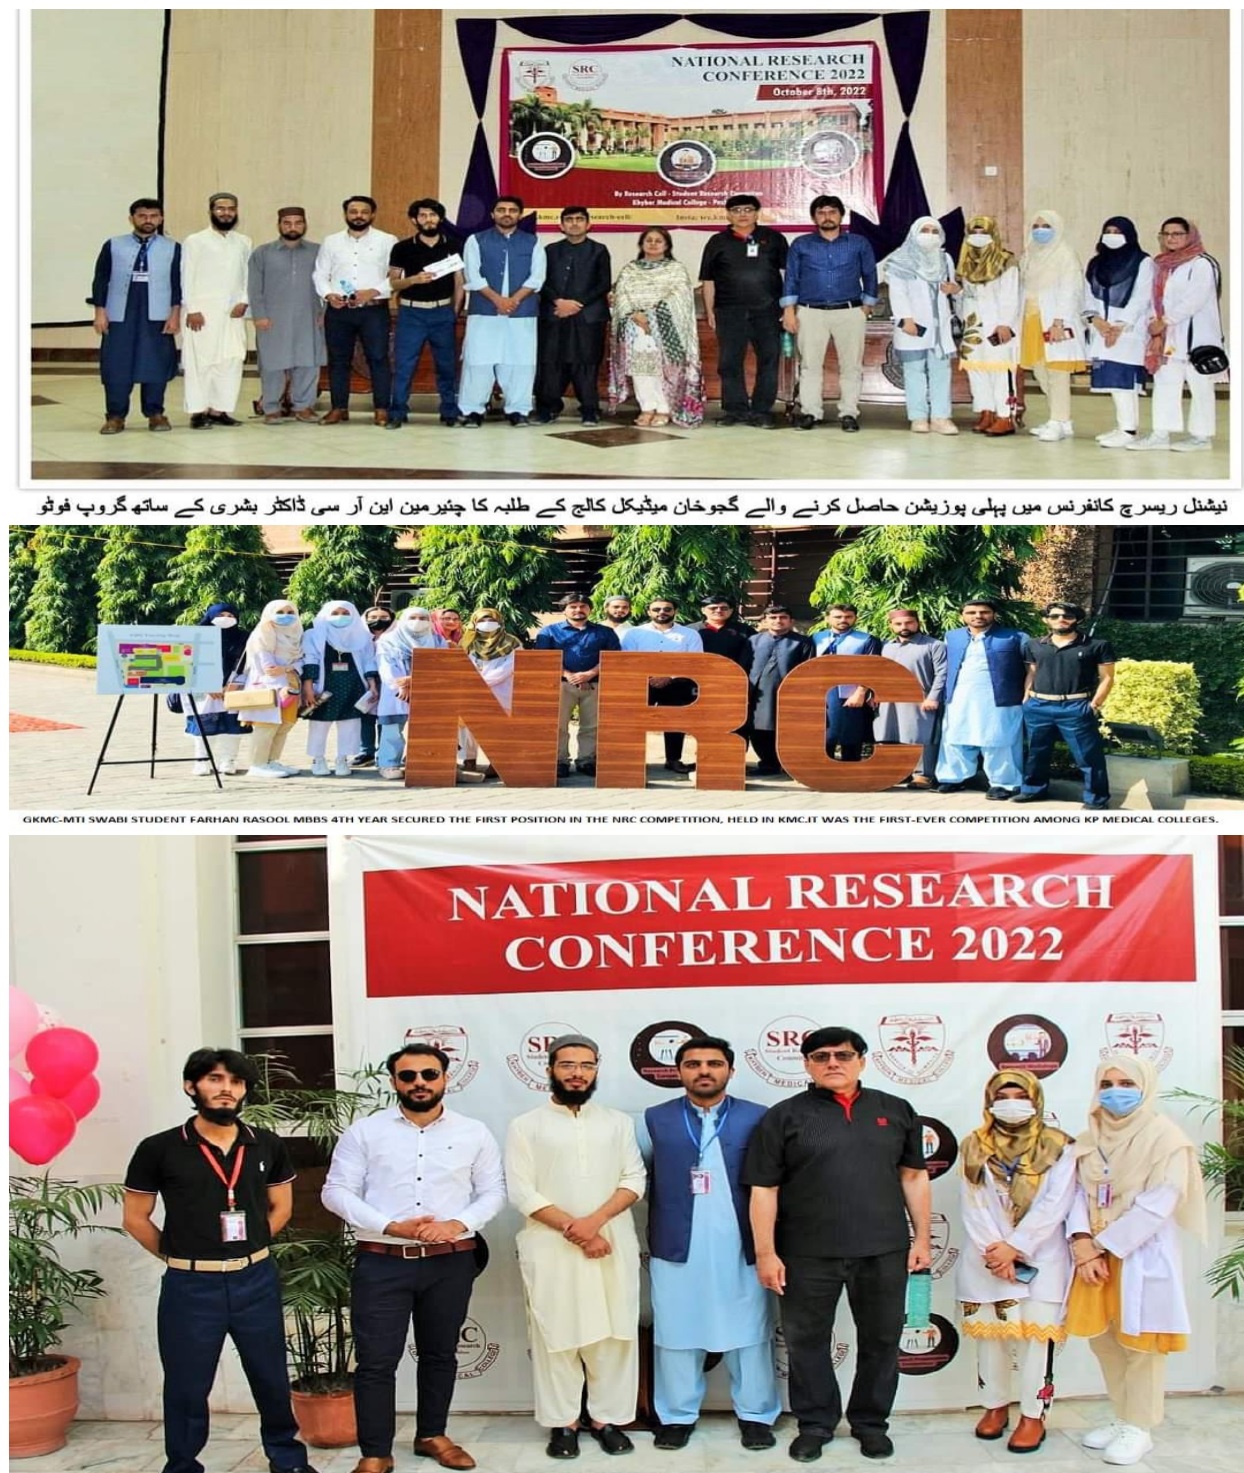 GKMC-MTI Swabi Student Farhan Rasool MBBS 4th year secured the First Position in the NRC competition, held in KMC It was the first-ever competition among KP Medical Colleges.